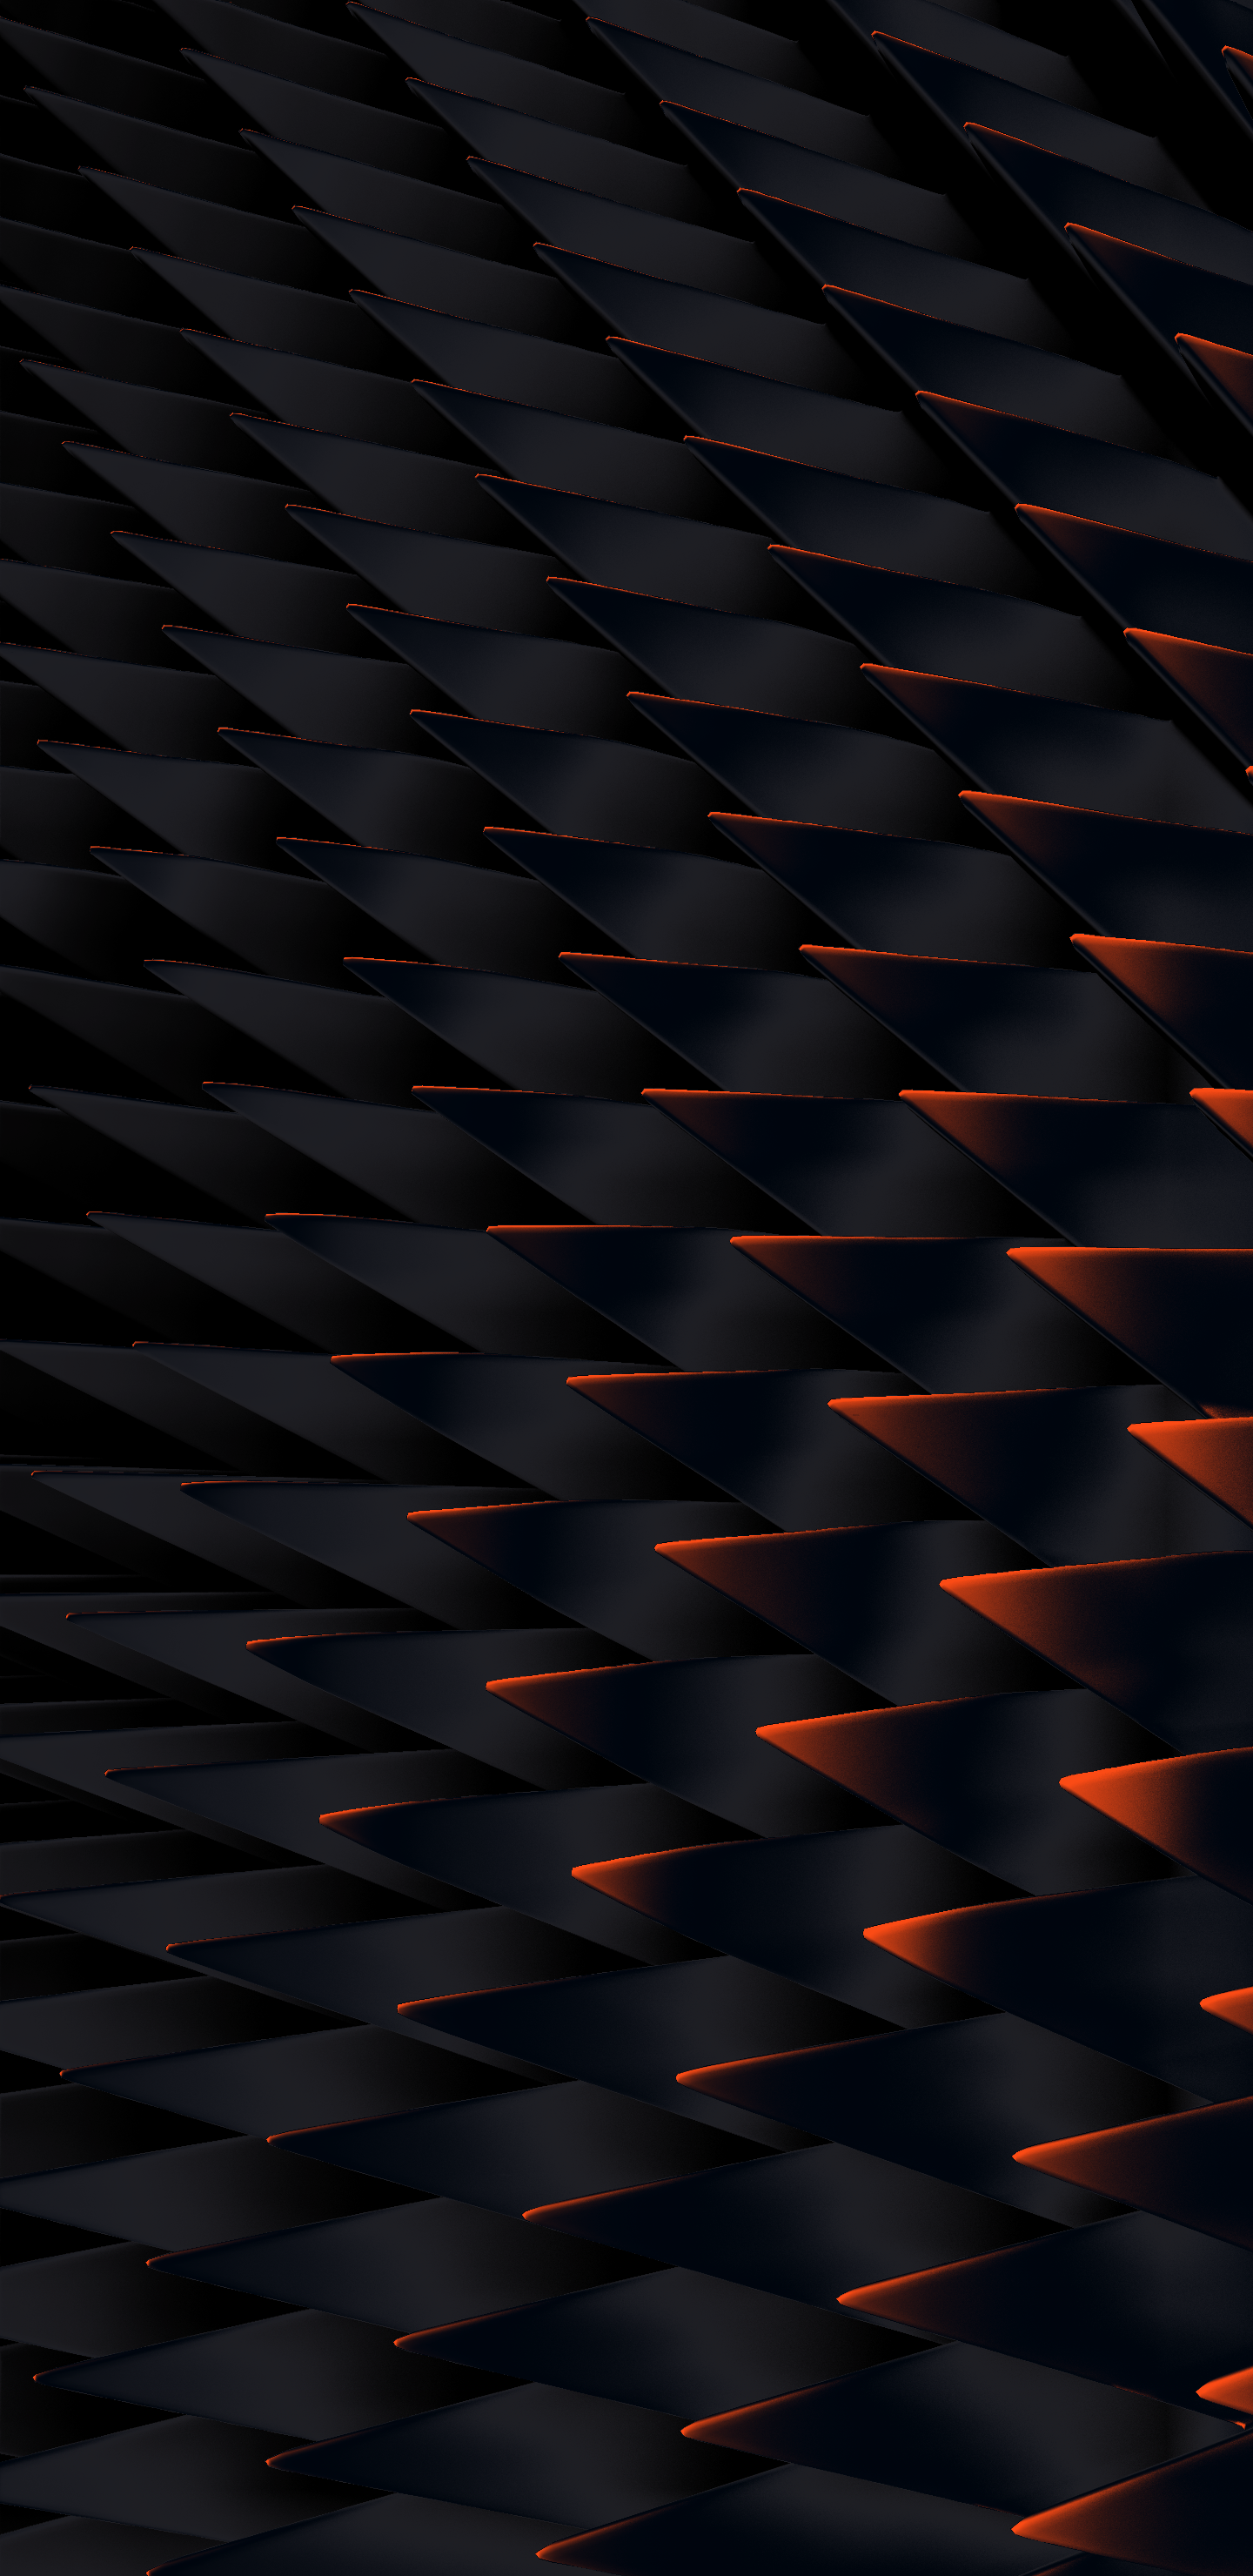 Glowing Spikes [1440x2960]